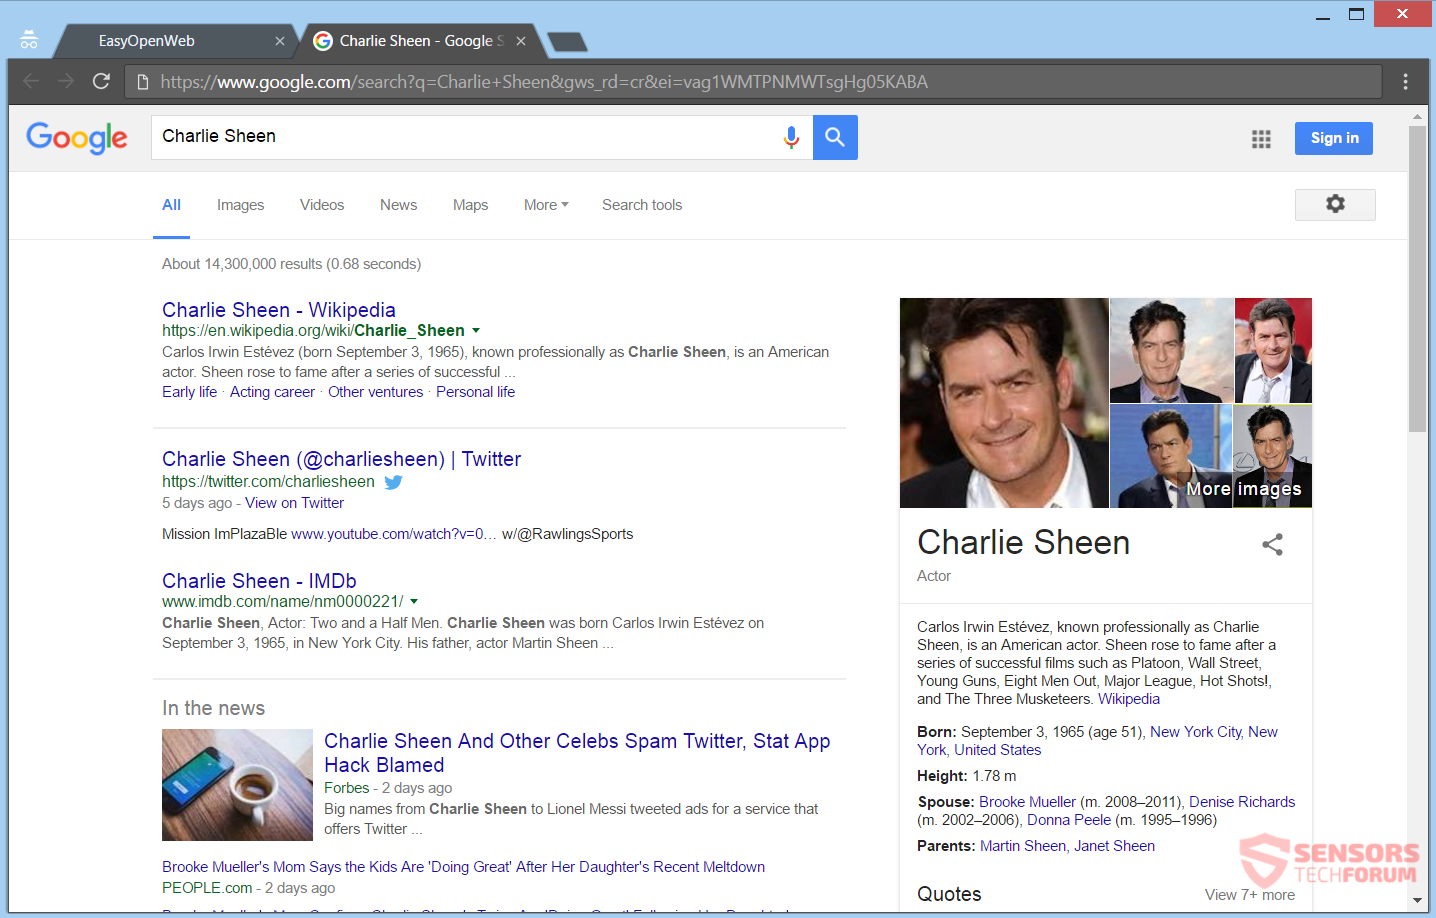 stf-easyopenweb-com-easy-open-web-com-browser-hijacker-redirect-charlie-sheen-search-results